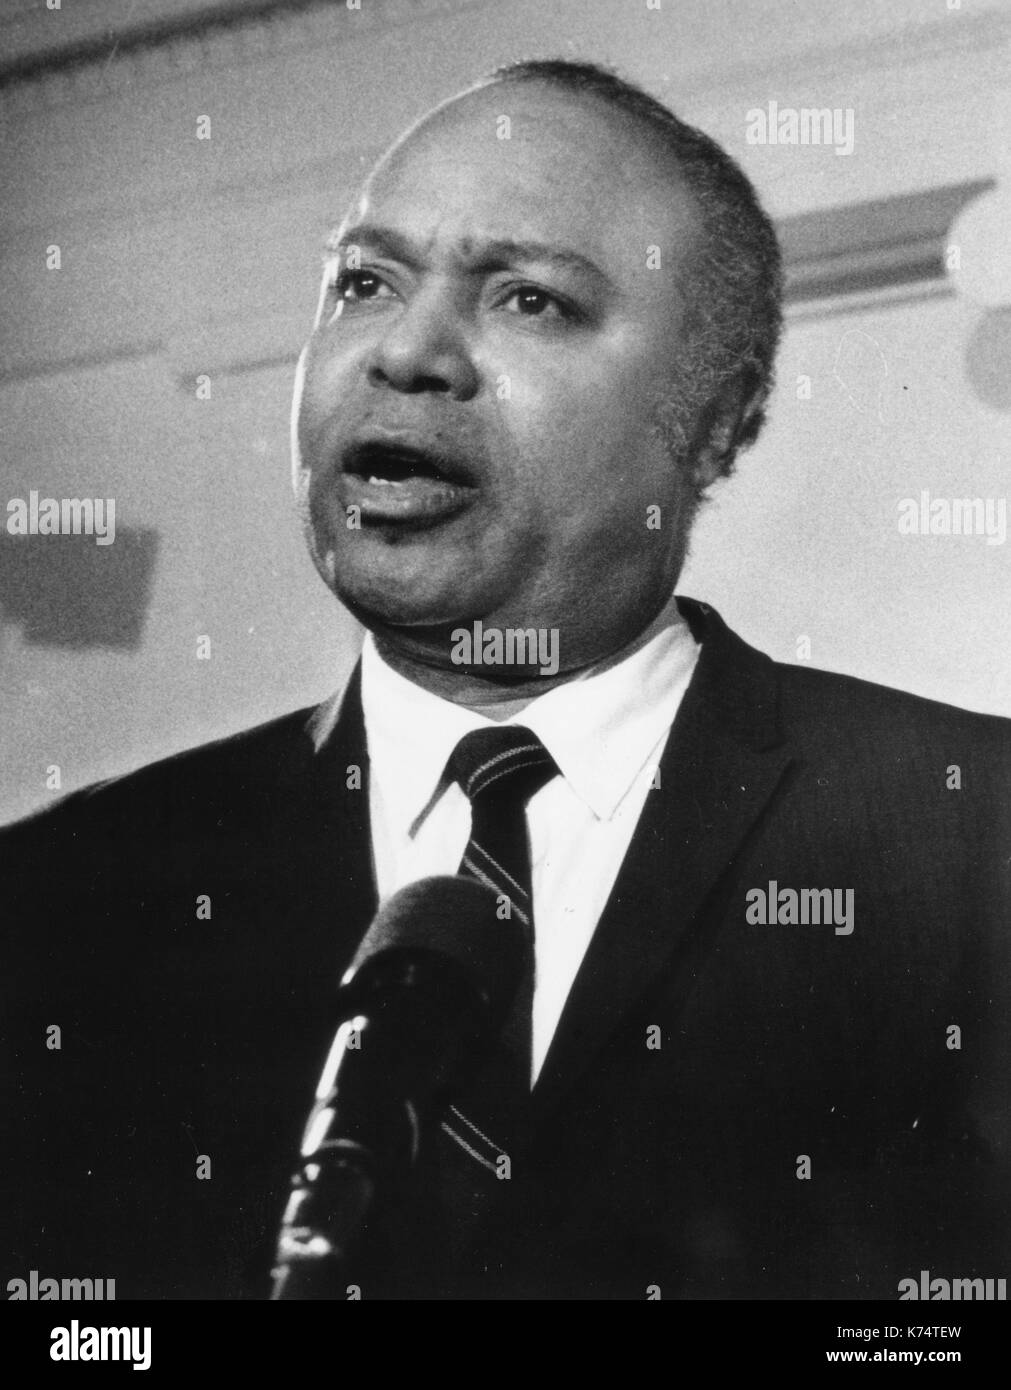 James Farmer, civil rights activist, co-founder of CORE (Congress of Racial Equality) and Assistant Secretary of the Department of Health, Education & Welfare during Richard Nixon's first term, Washington, DC, 1969. Stock Photo